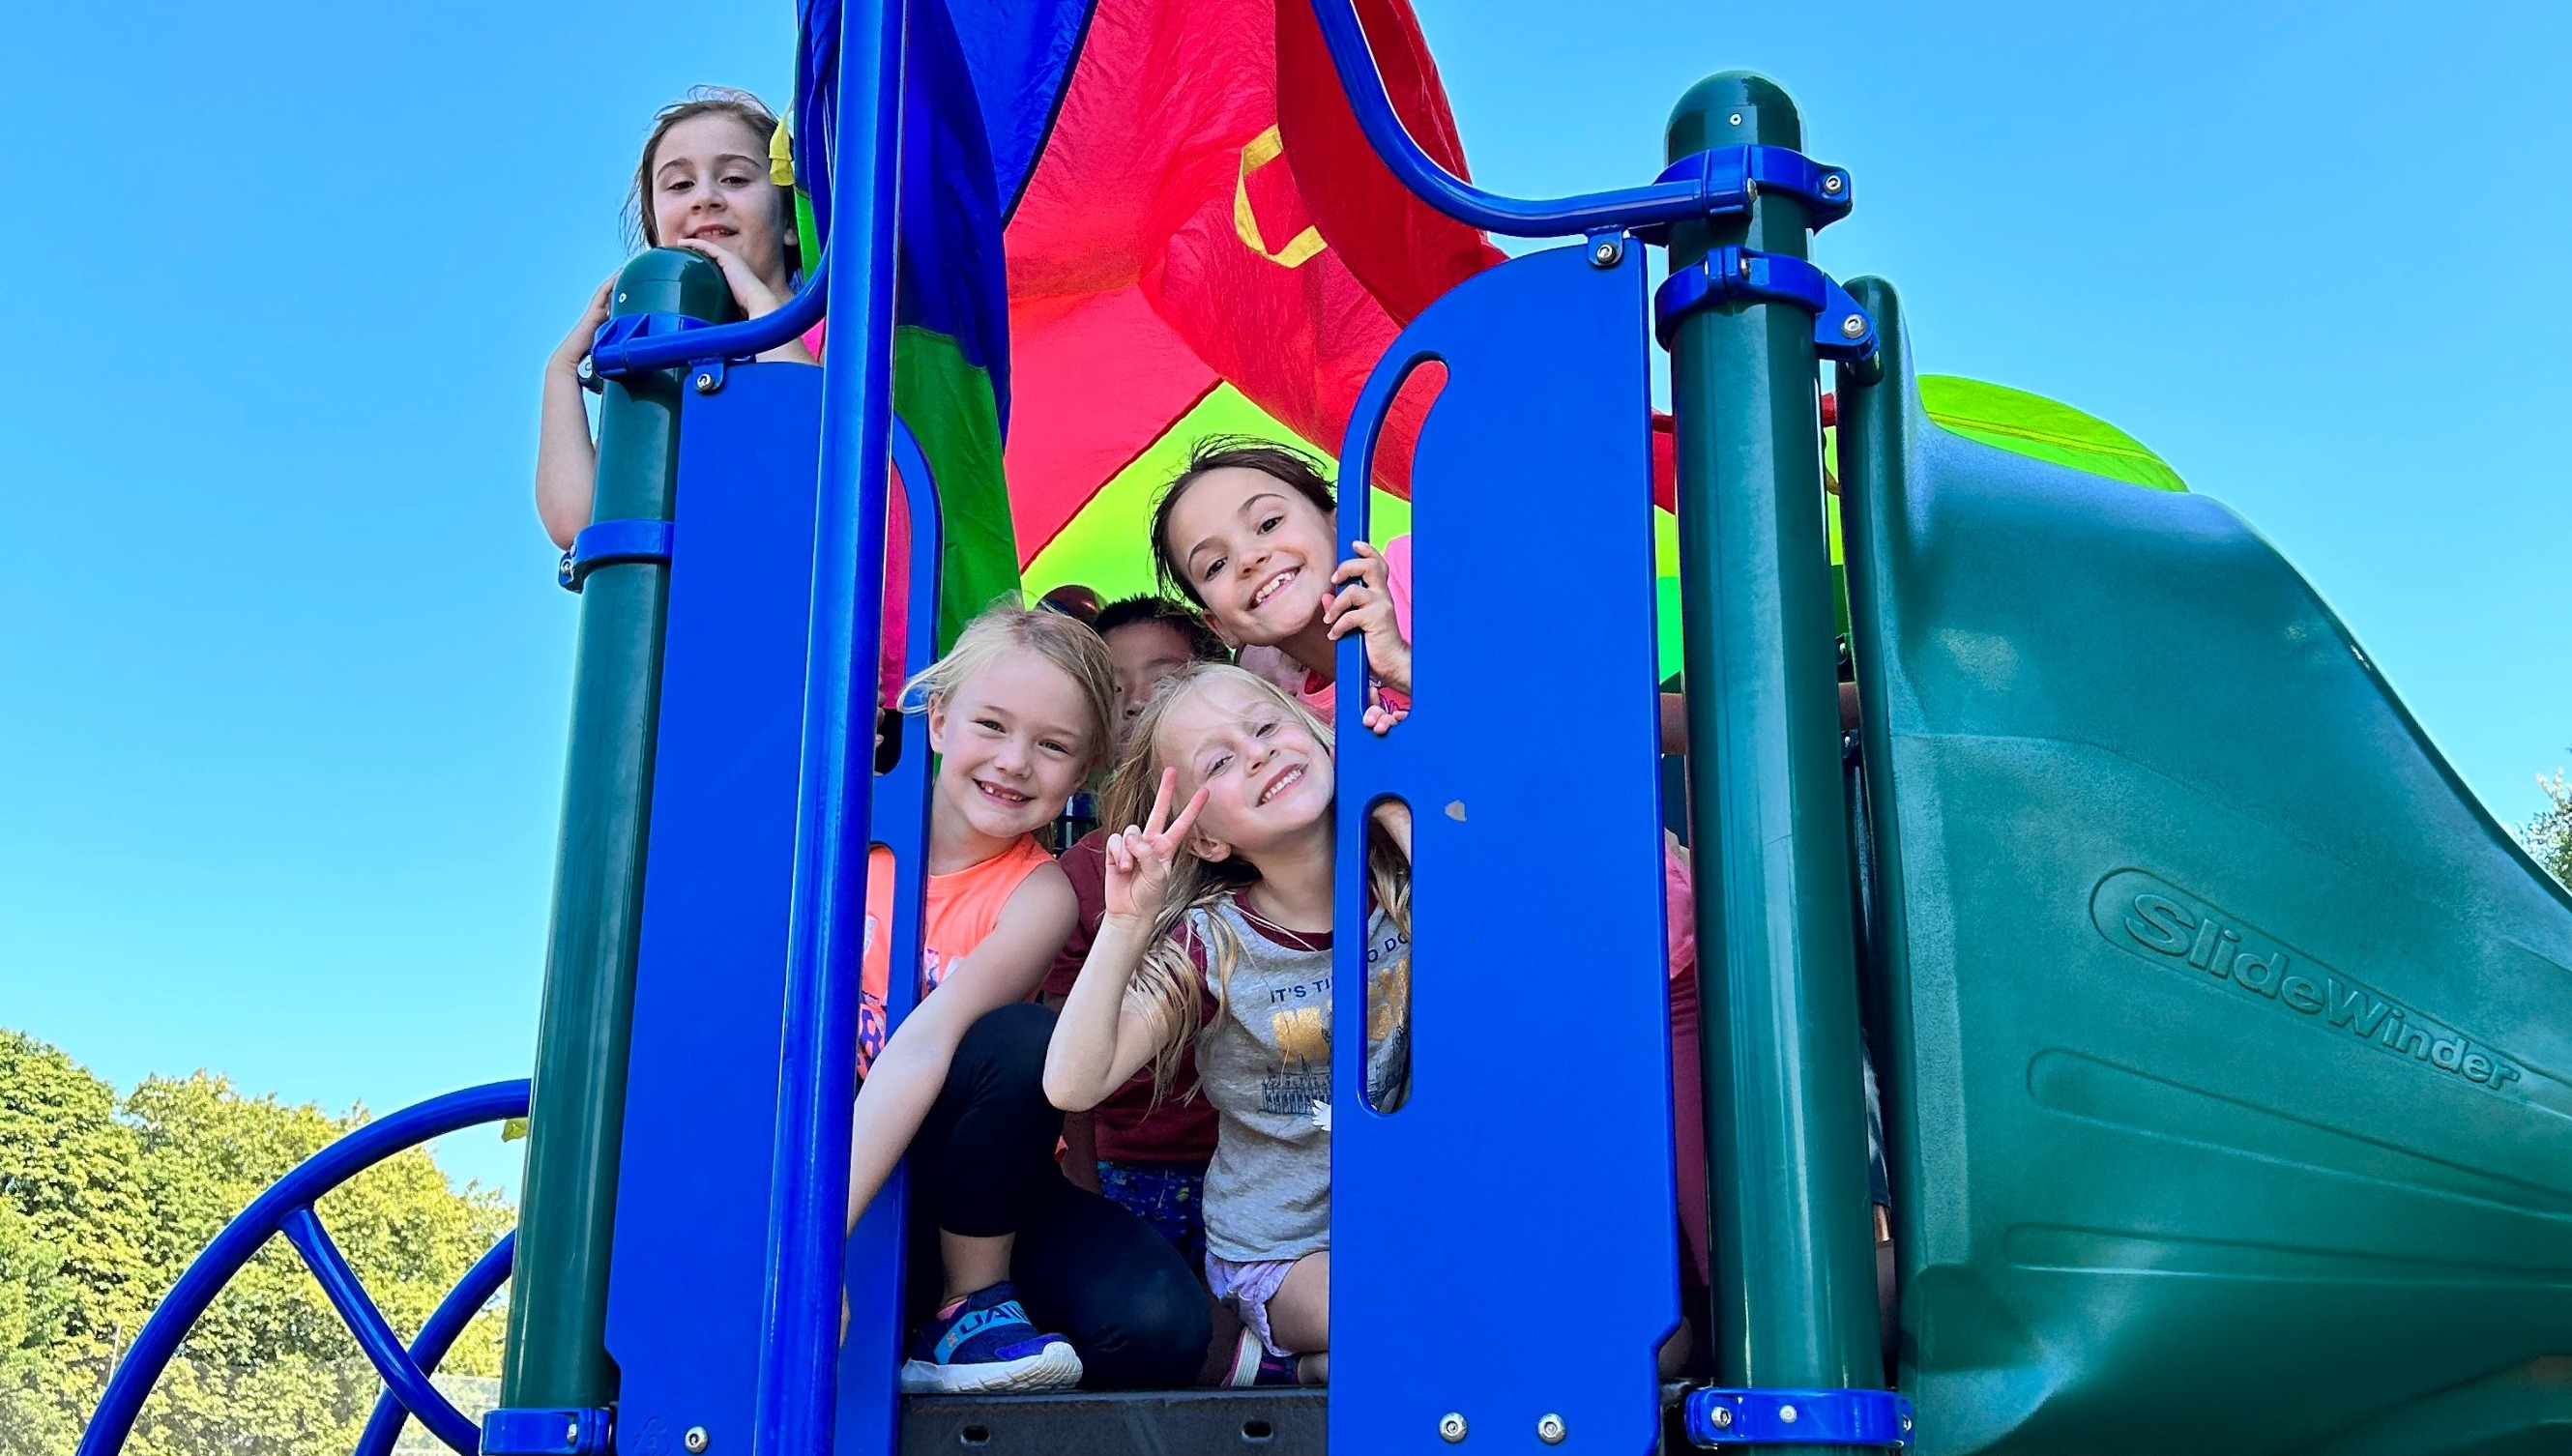 Kids posing for a photo on the playground